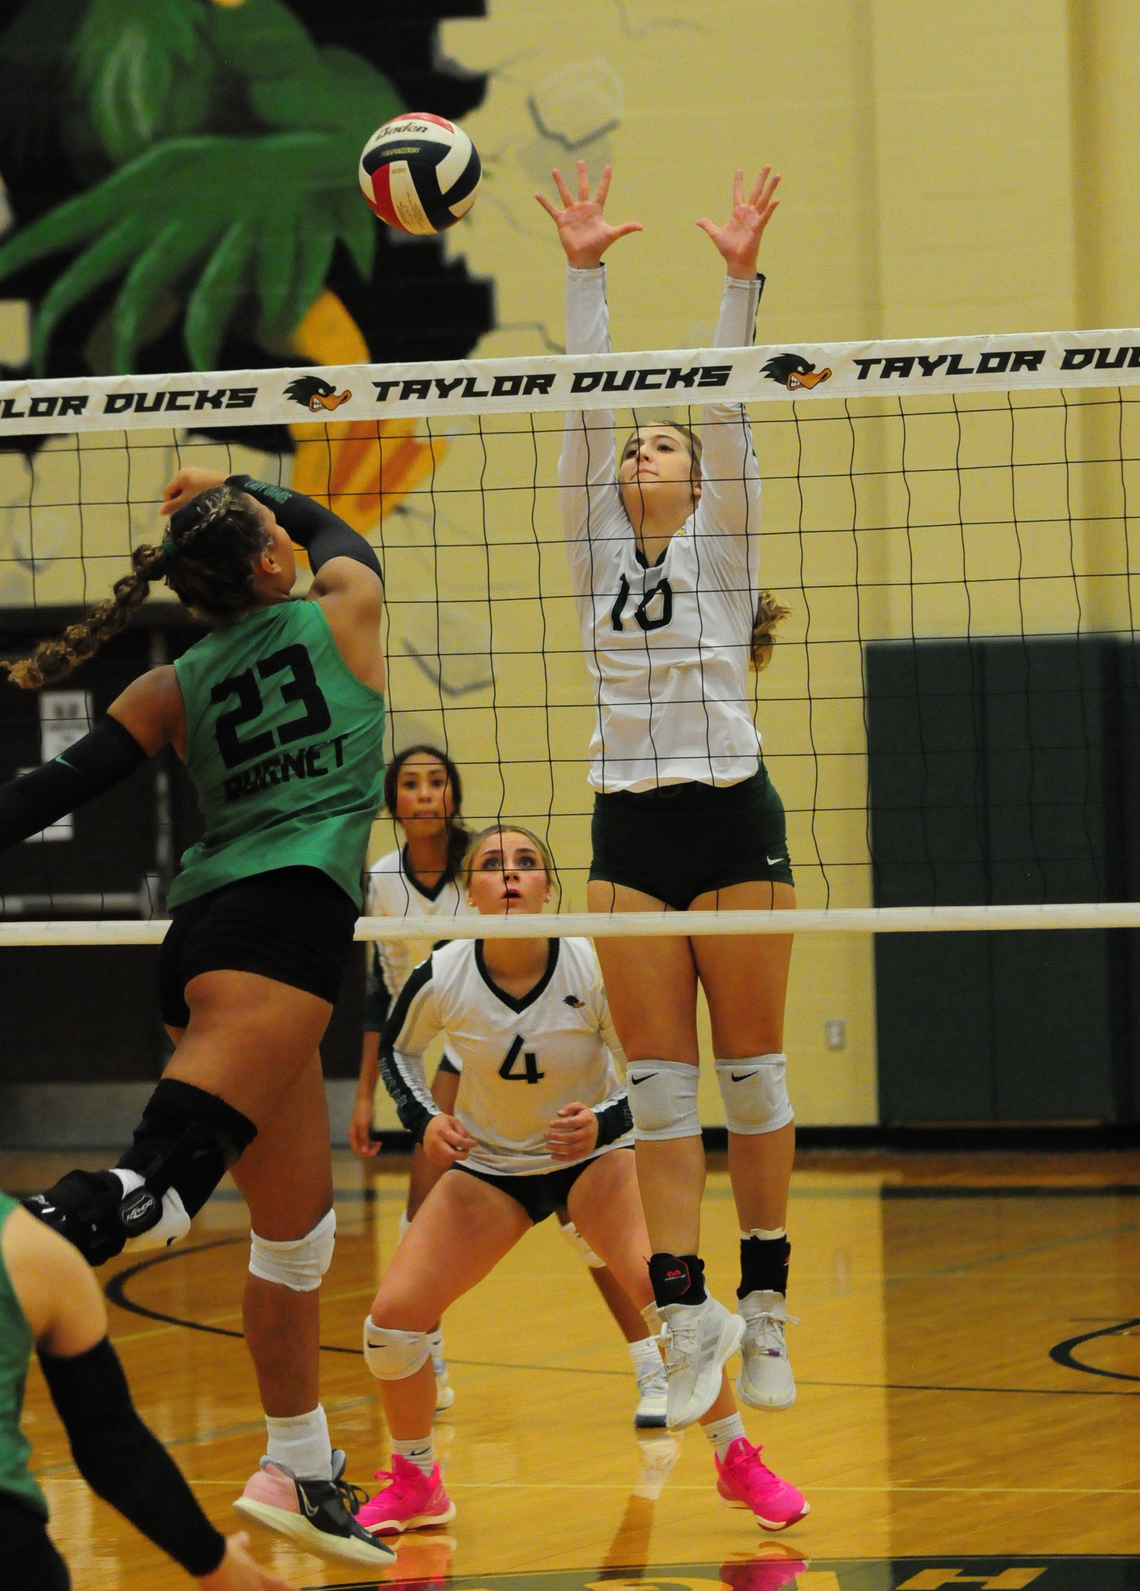 Taylor High School varsity volleyball senior Ansley Reed (10) goes up to block a shot at the net while fellow senior Camryn Nunamaker (4) looks on during the Lady Ducks’ home match victory vs. Burnet High School on Tuesday night. Photo by Larry Pelchat 